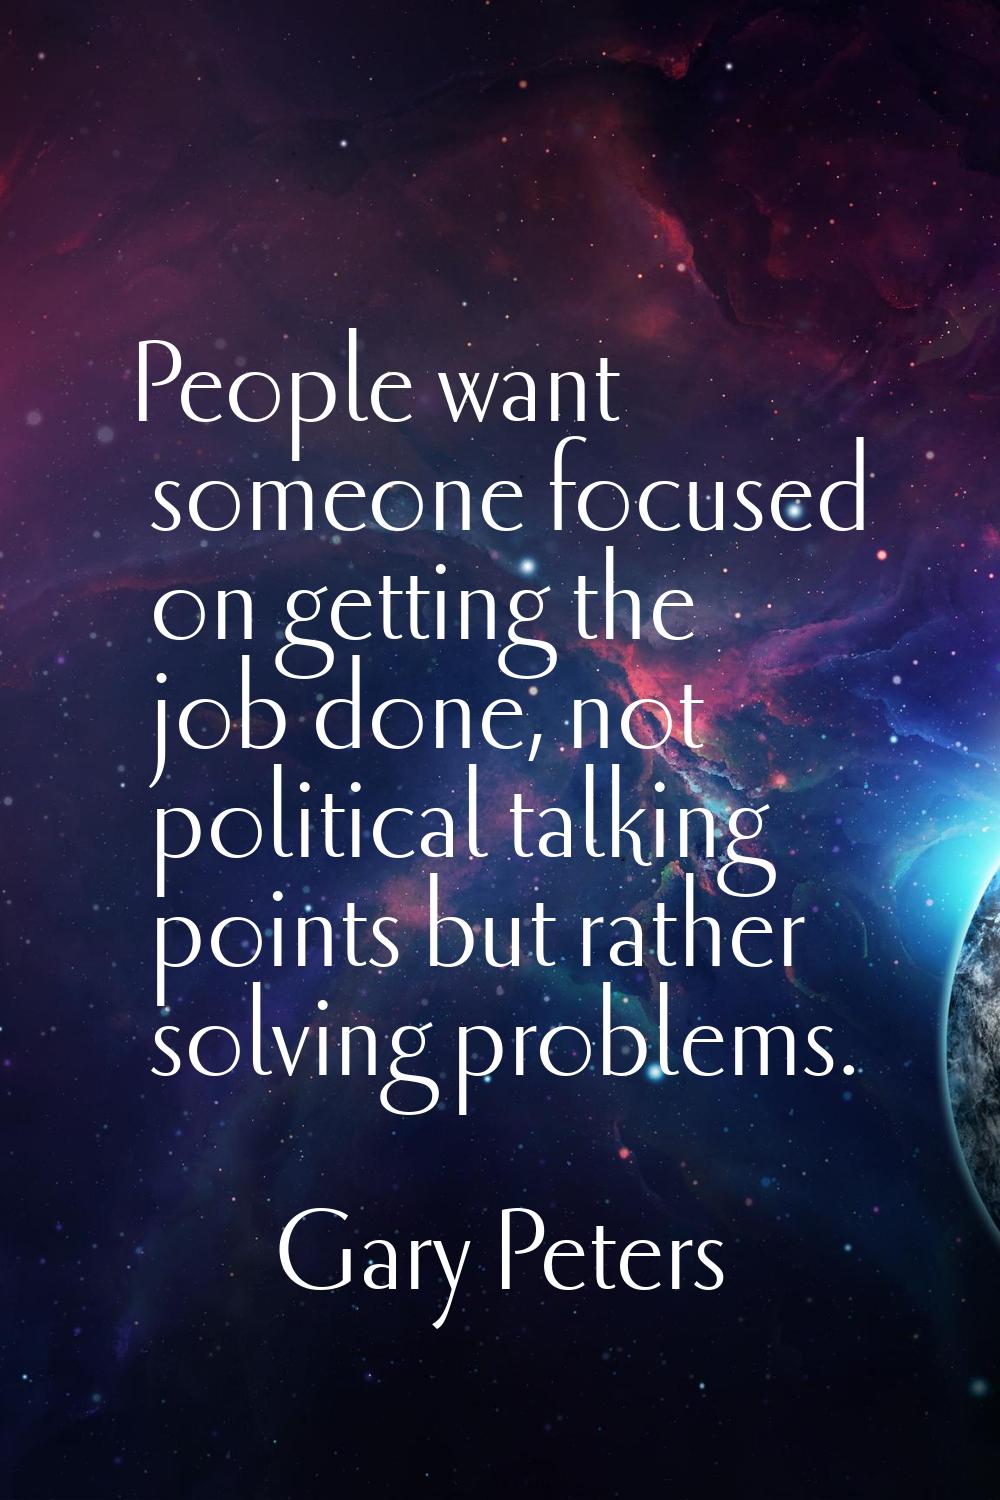 People want someone focused on getting the job done, not political talking points but rather solvin